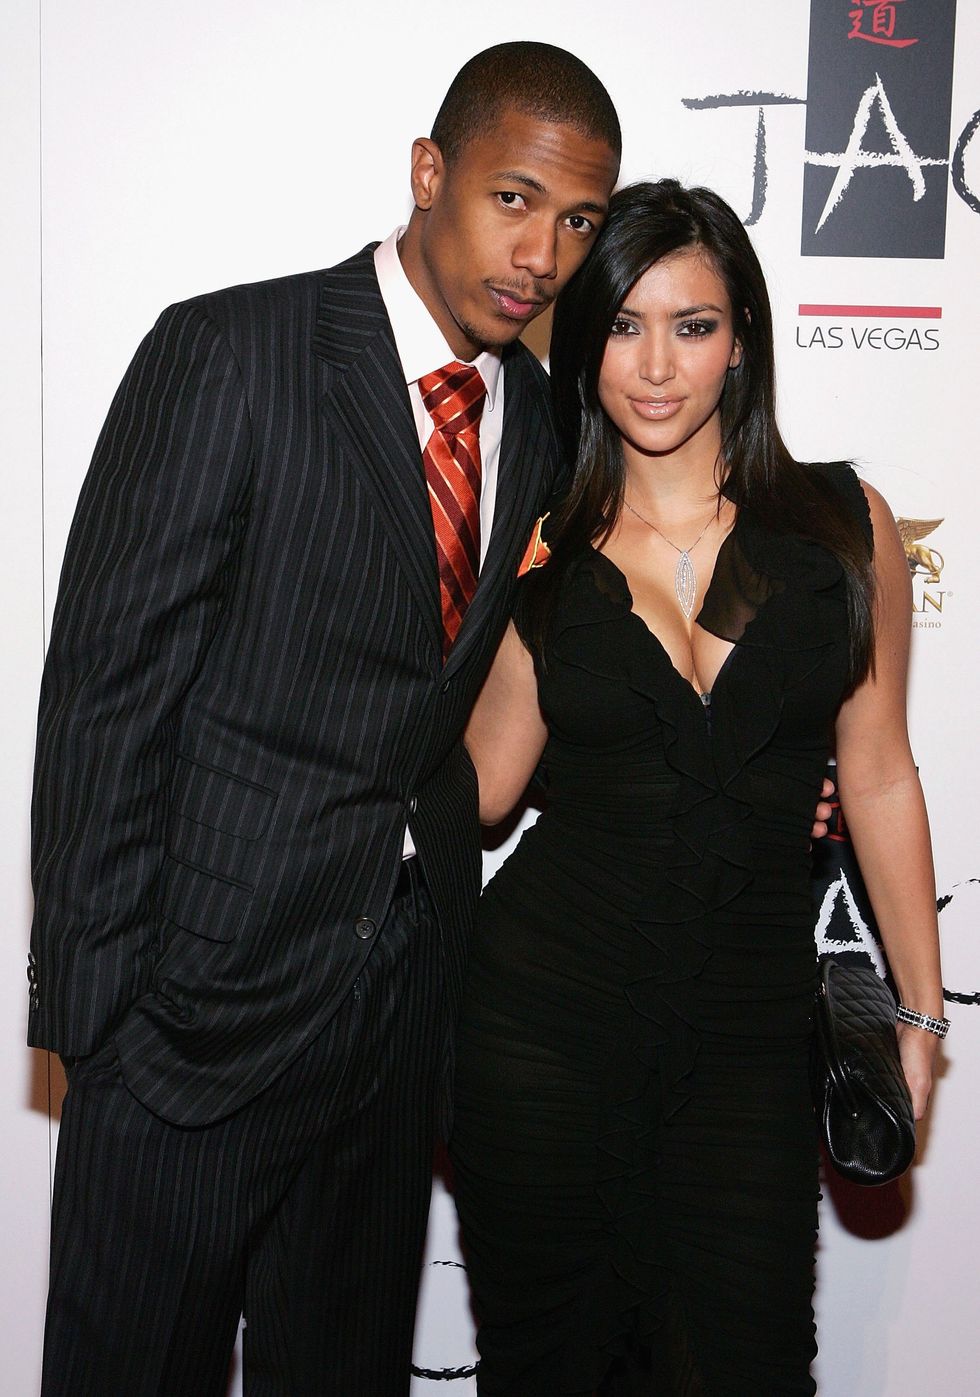 las vegas september 30 actor nick cannon l and kim kardashian arrive at the tao nightclub at the venetian resort hotel casino during the clubs anniversary party on september 30, 2006 in las vegas, nevada photo by ethan millergetty images